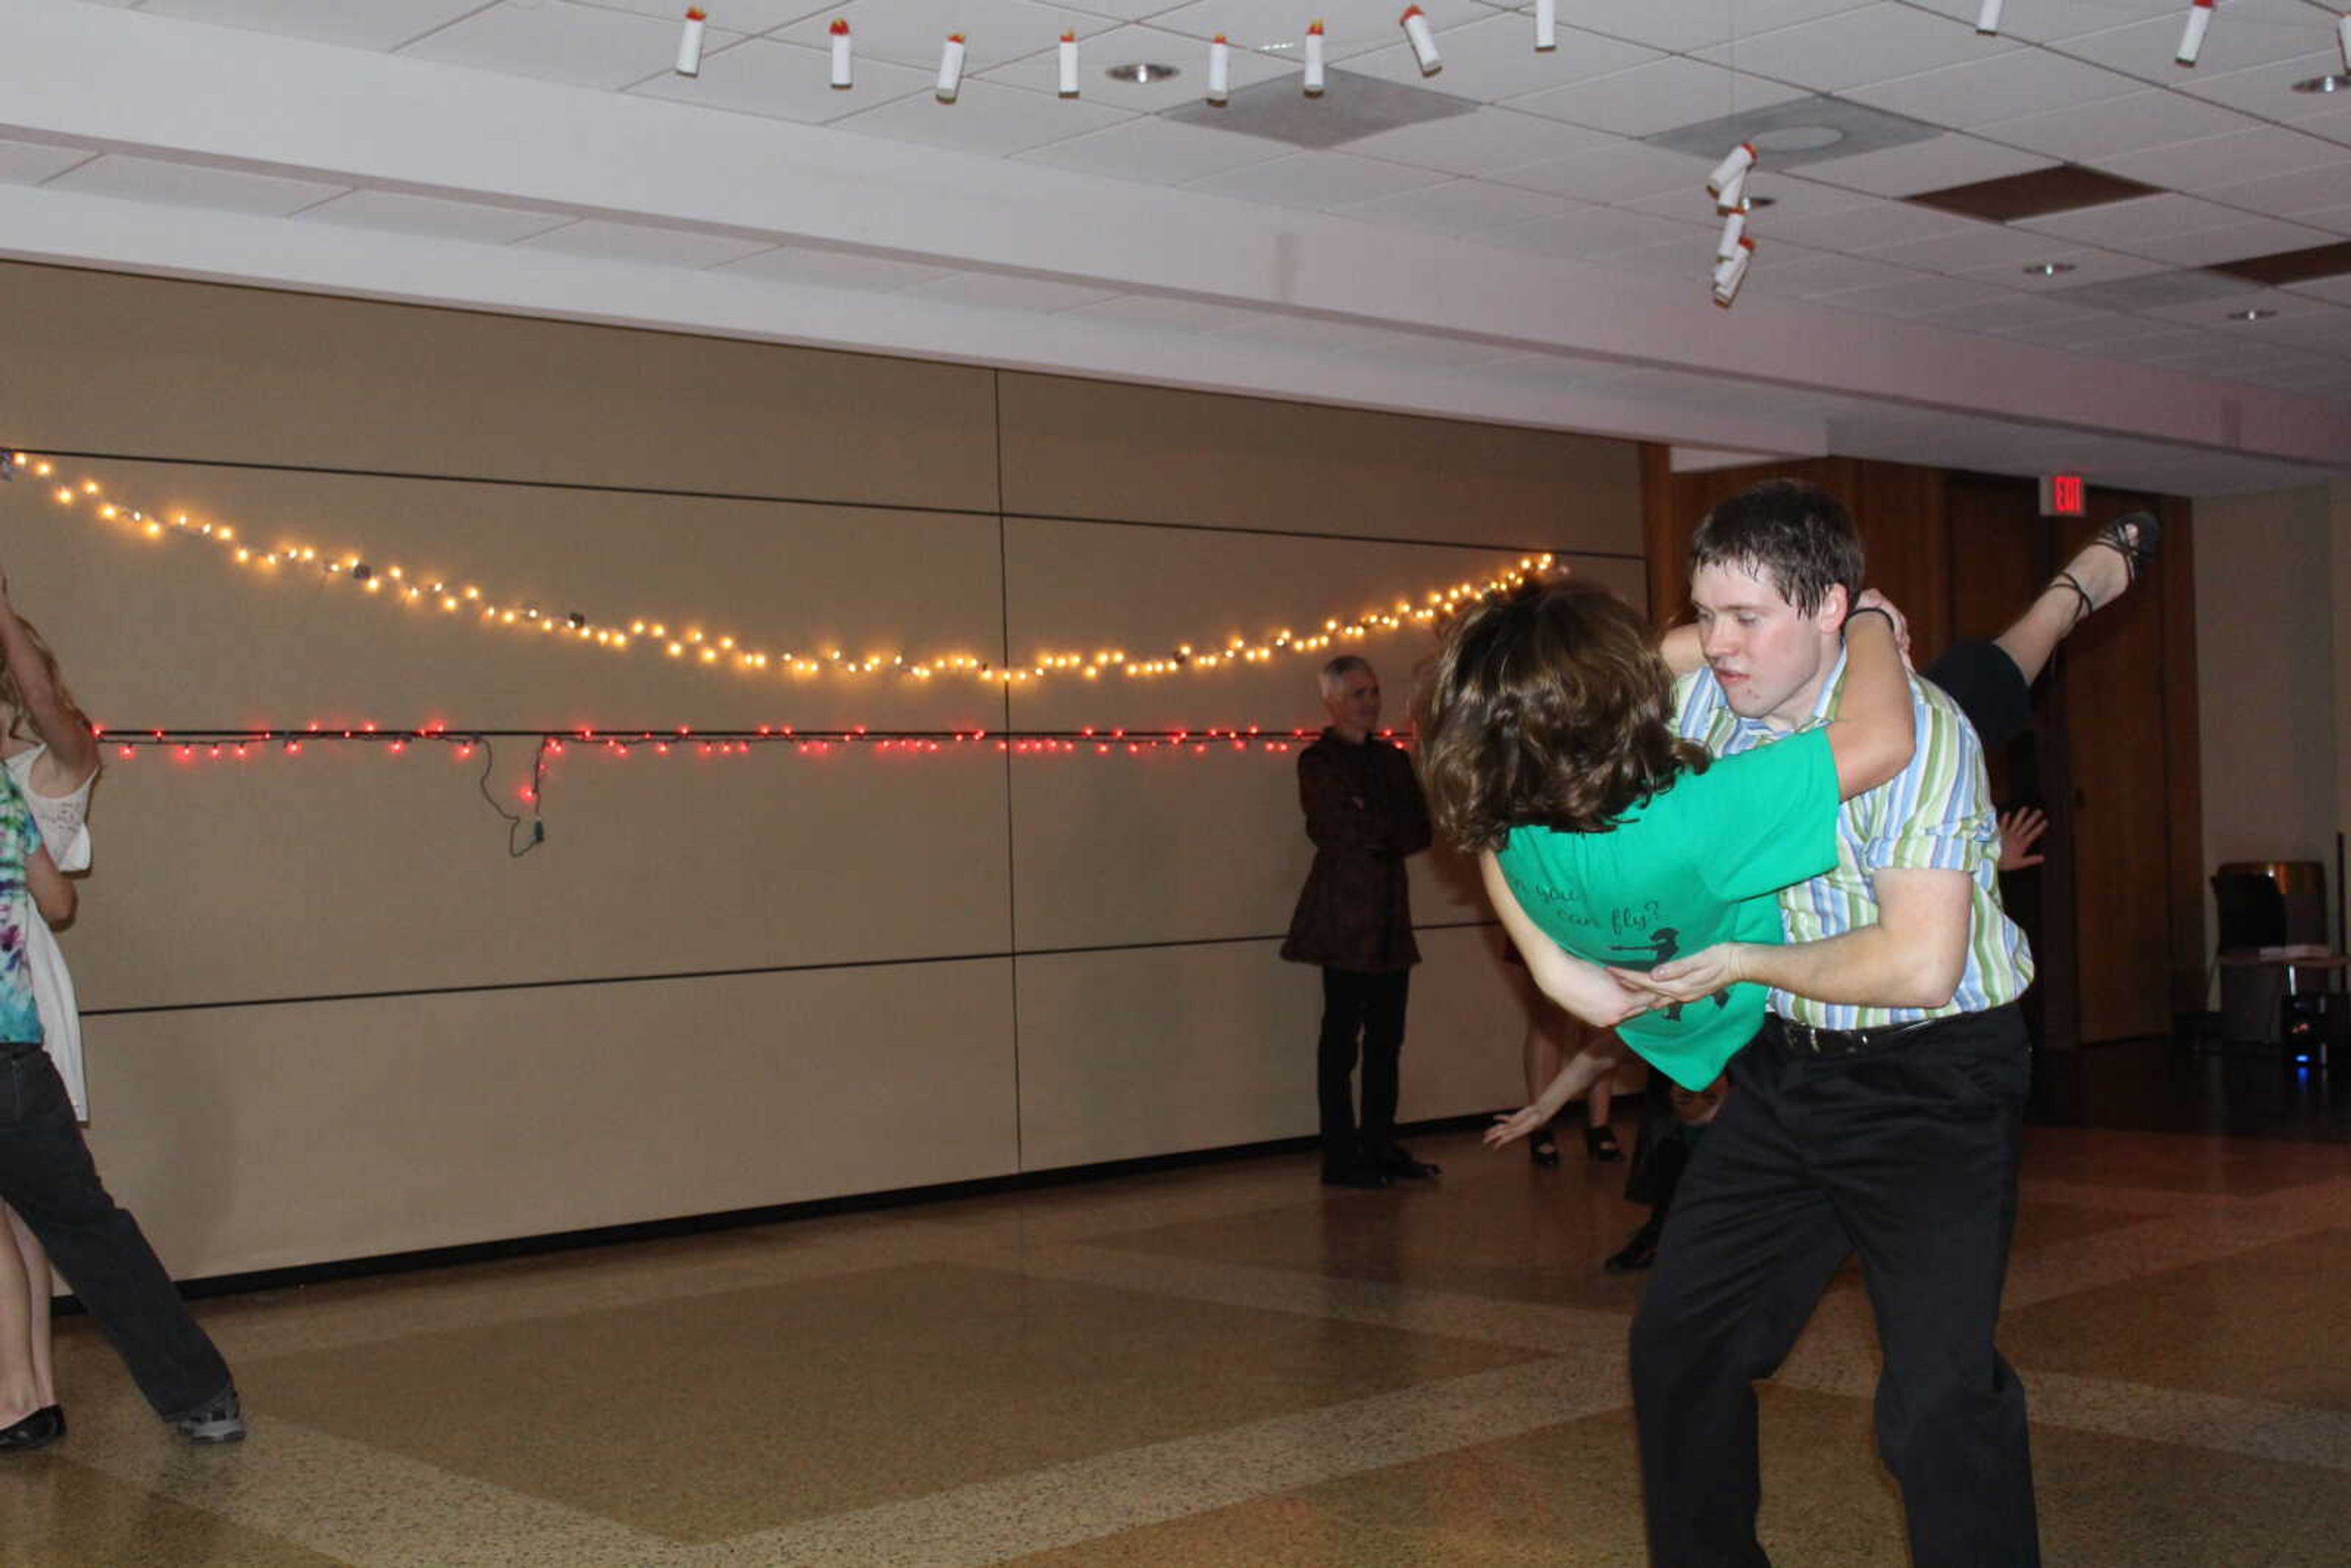 Members of the Ariel Swing Dance club show off their moves at the Yule Ball on Saturday.